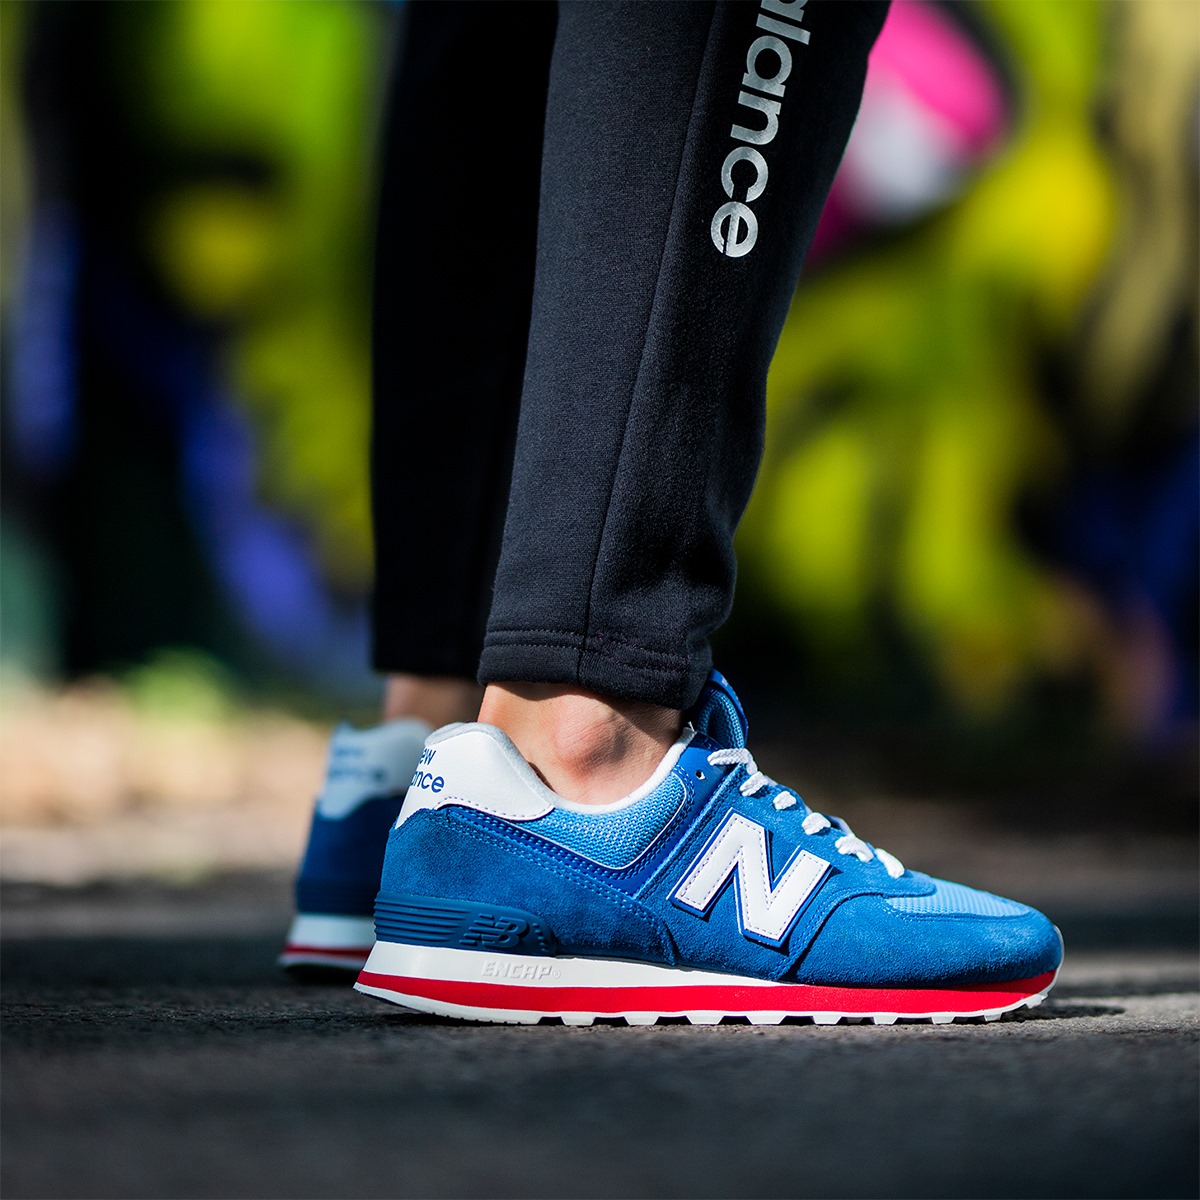 meel Slager syndroom JustFreshKicks on Twitter: "Ends soon: New Balance 574 'Classic Blue' for  $34.99 + FREE shipping Link-&gt; https://t.co/apJ2LiMH7D  https://t.co/wq1YeTxQKj" / Twitter